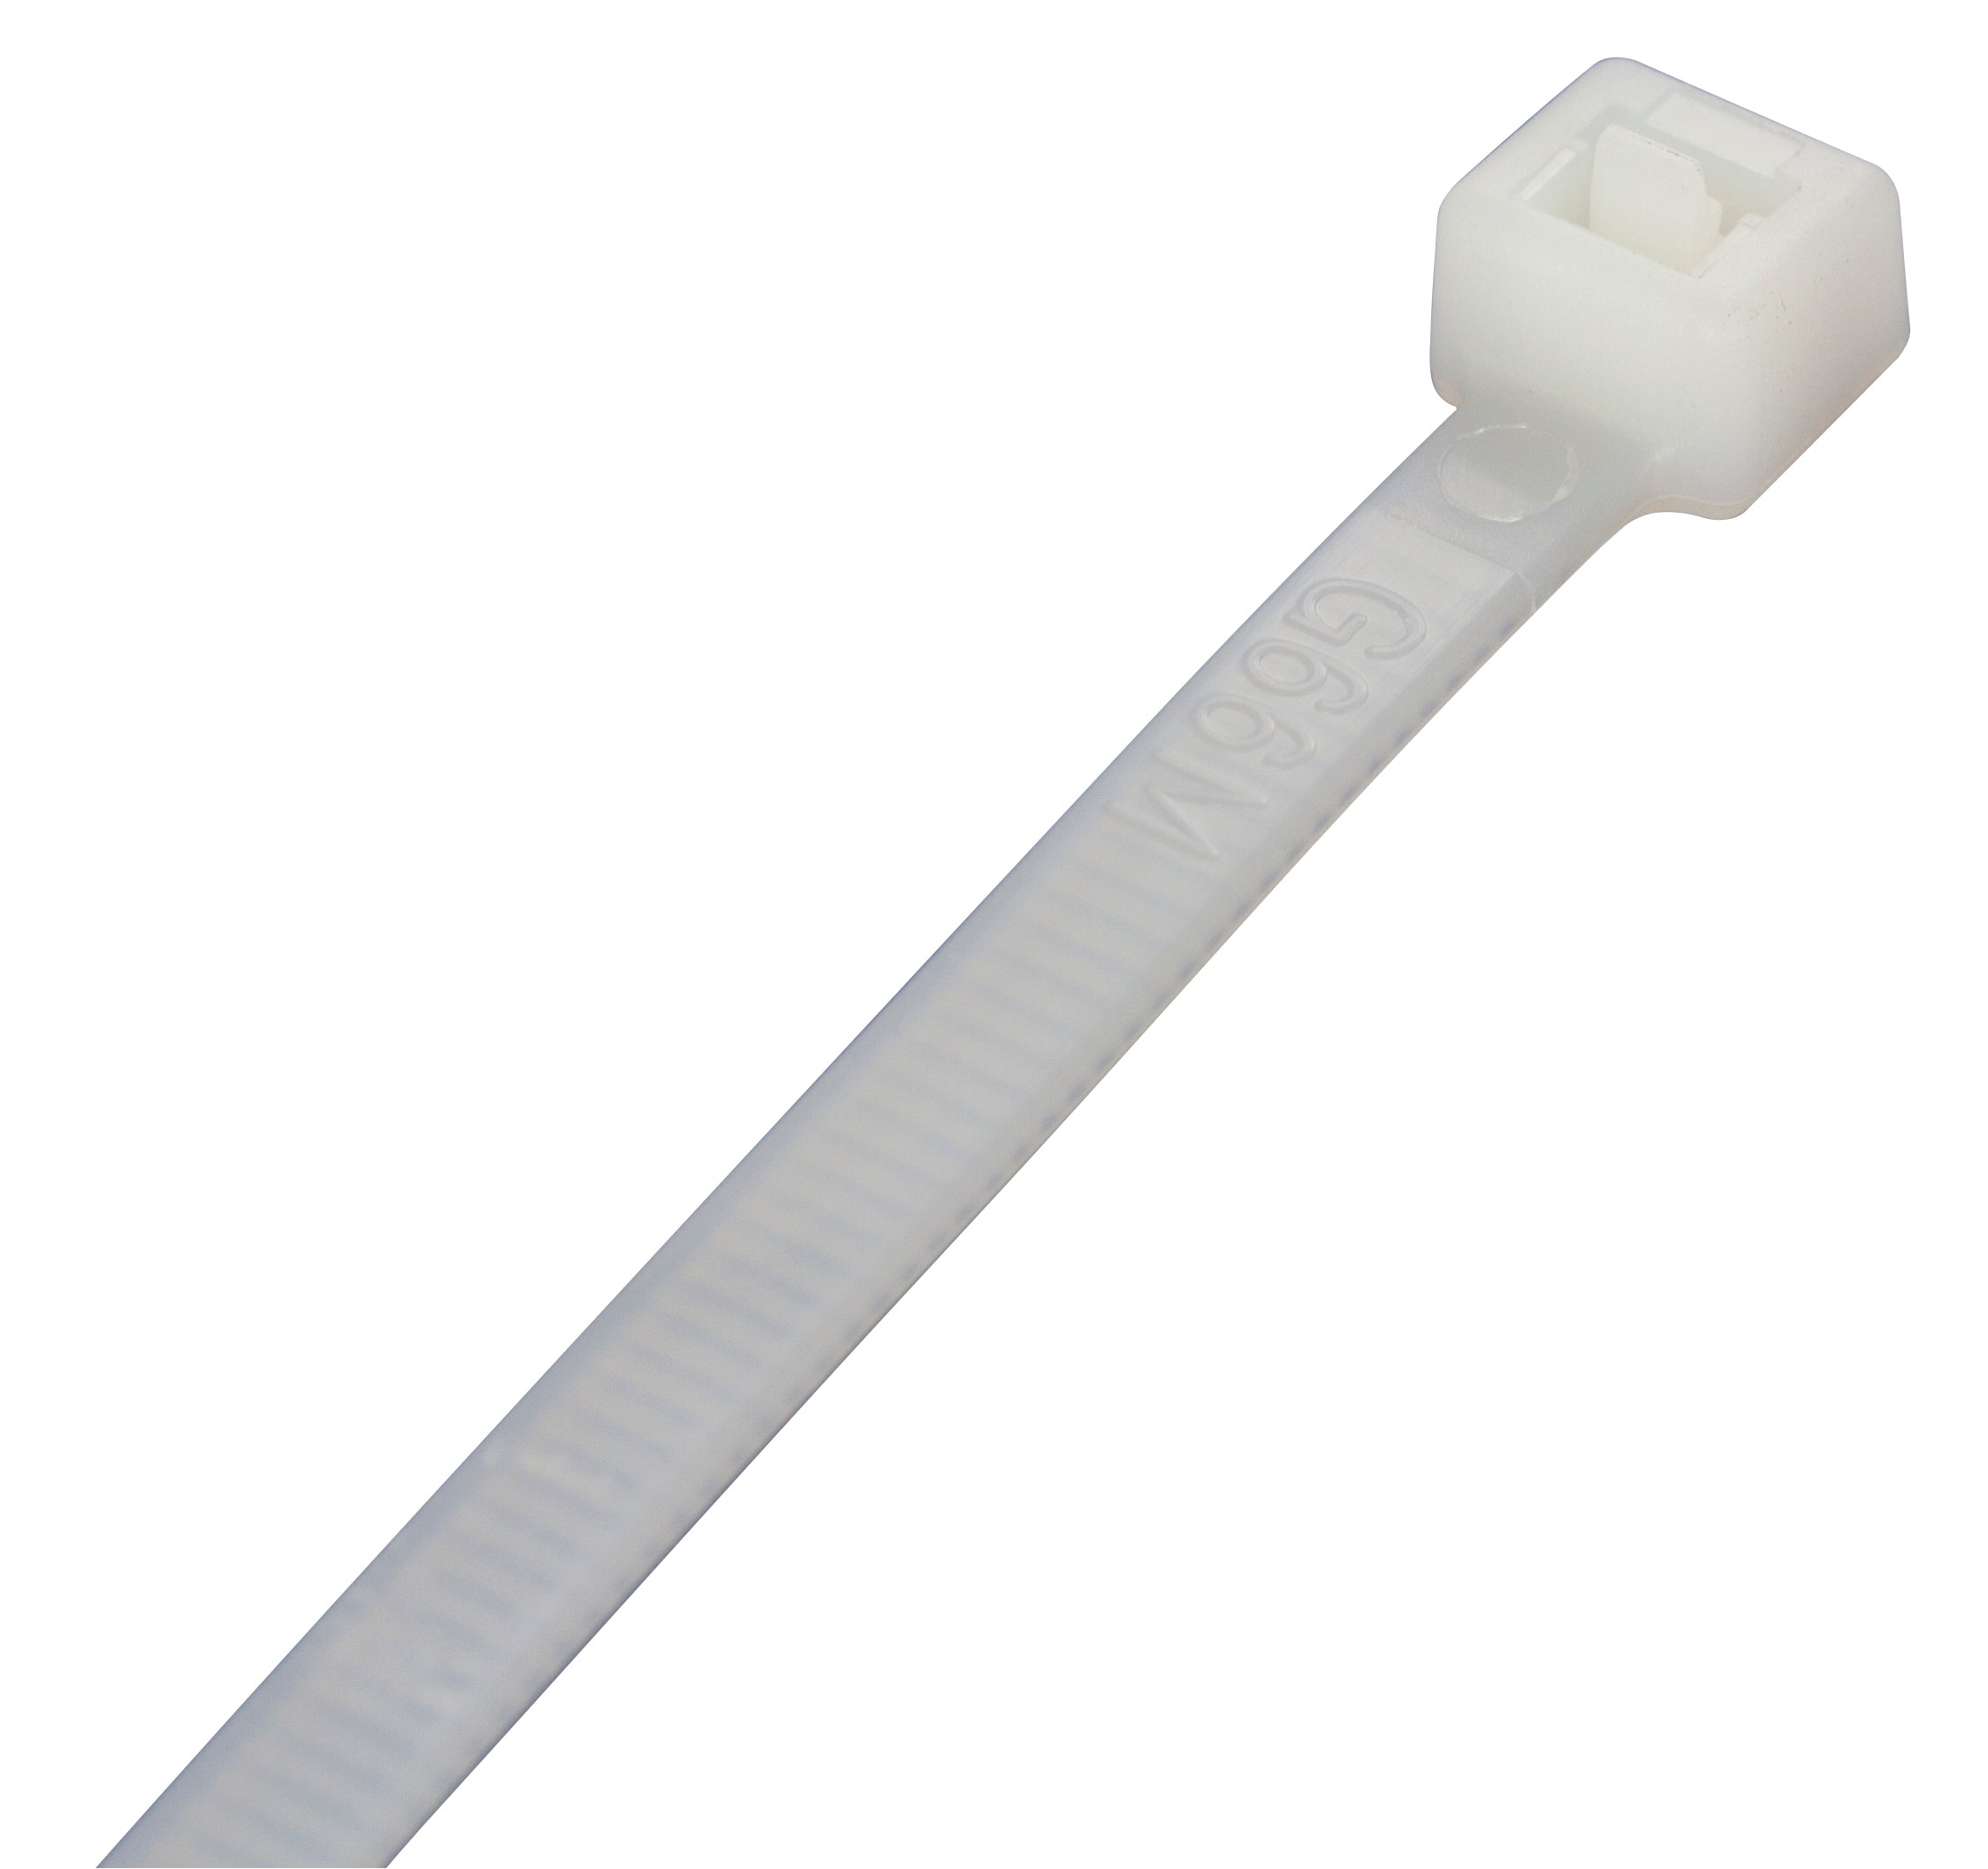 Premium Natural Cable Ties 280mm x 4.8mm - Pack of 100